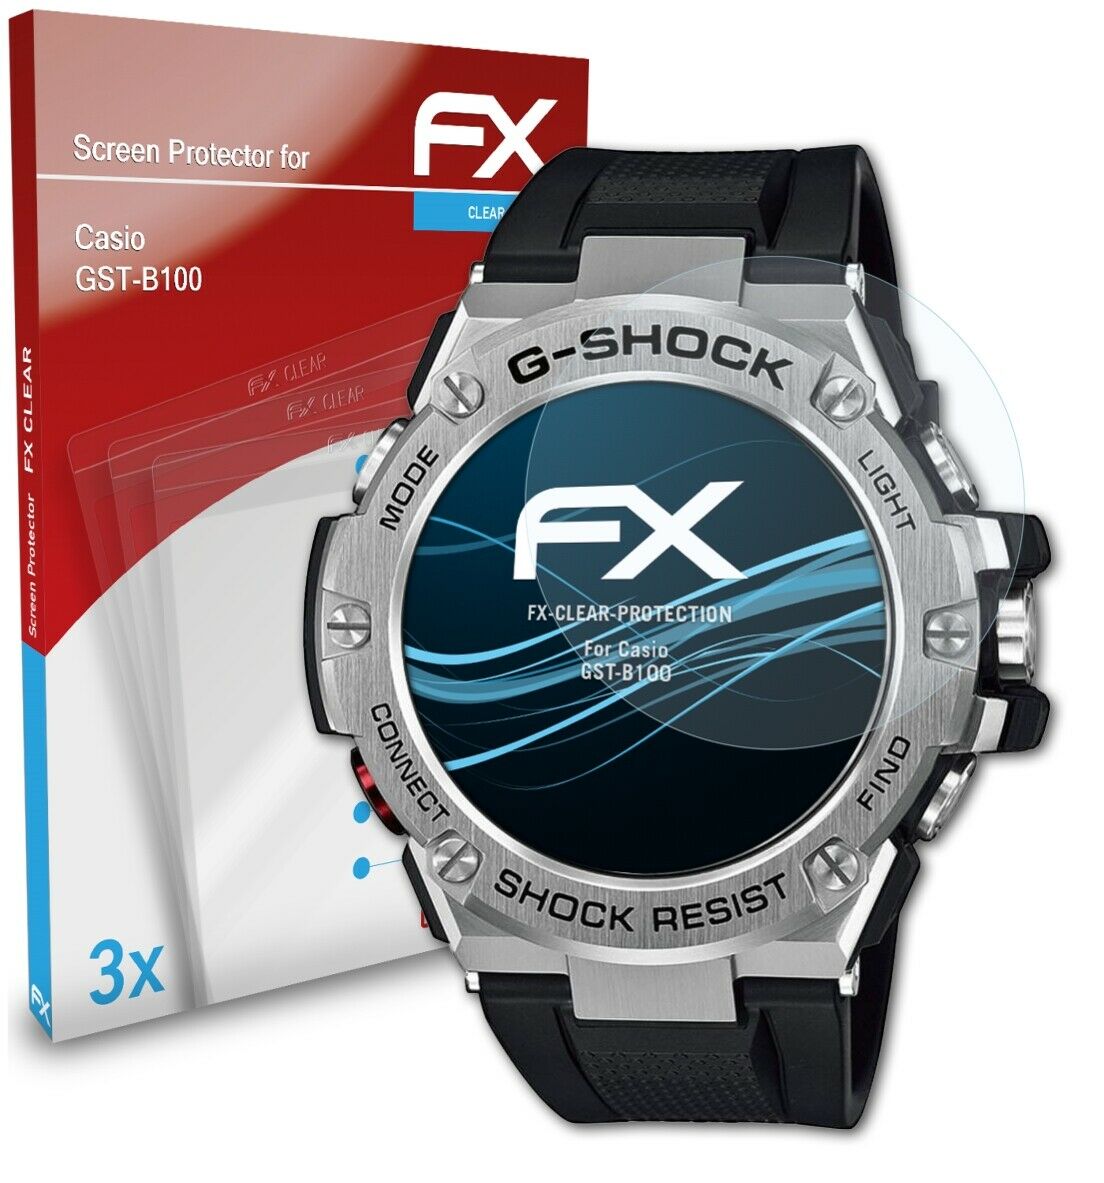 atFoliX 3x Screen Protection Film for Casio GST-B100 Screen Protector clear